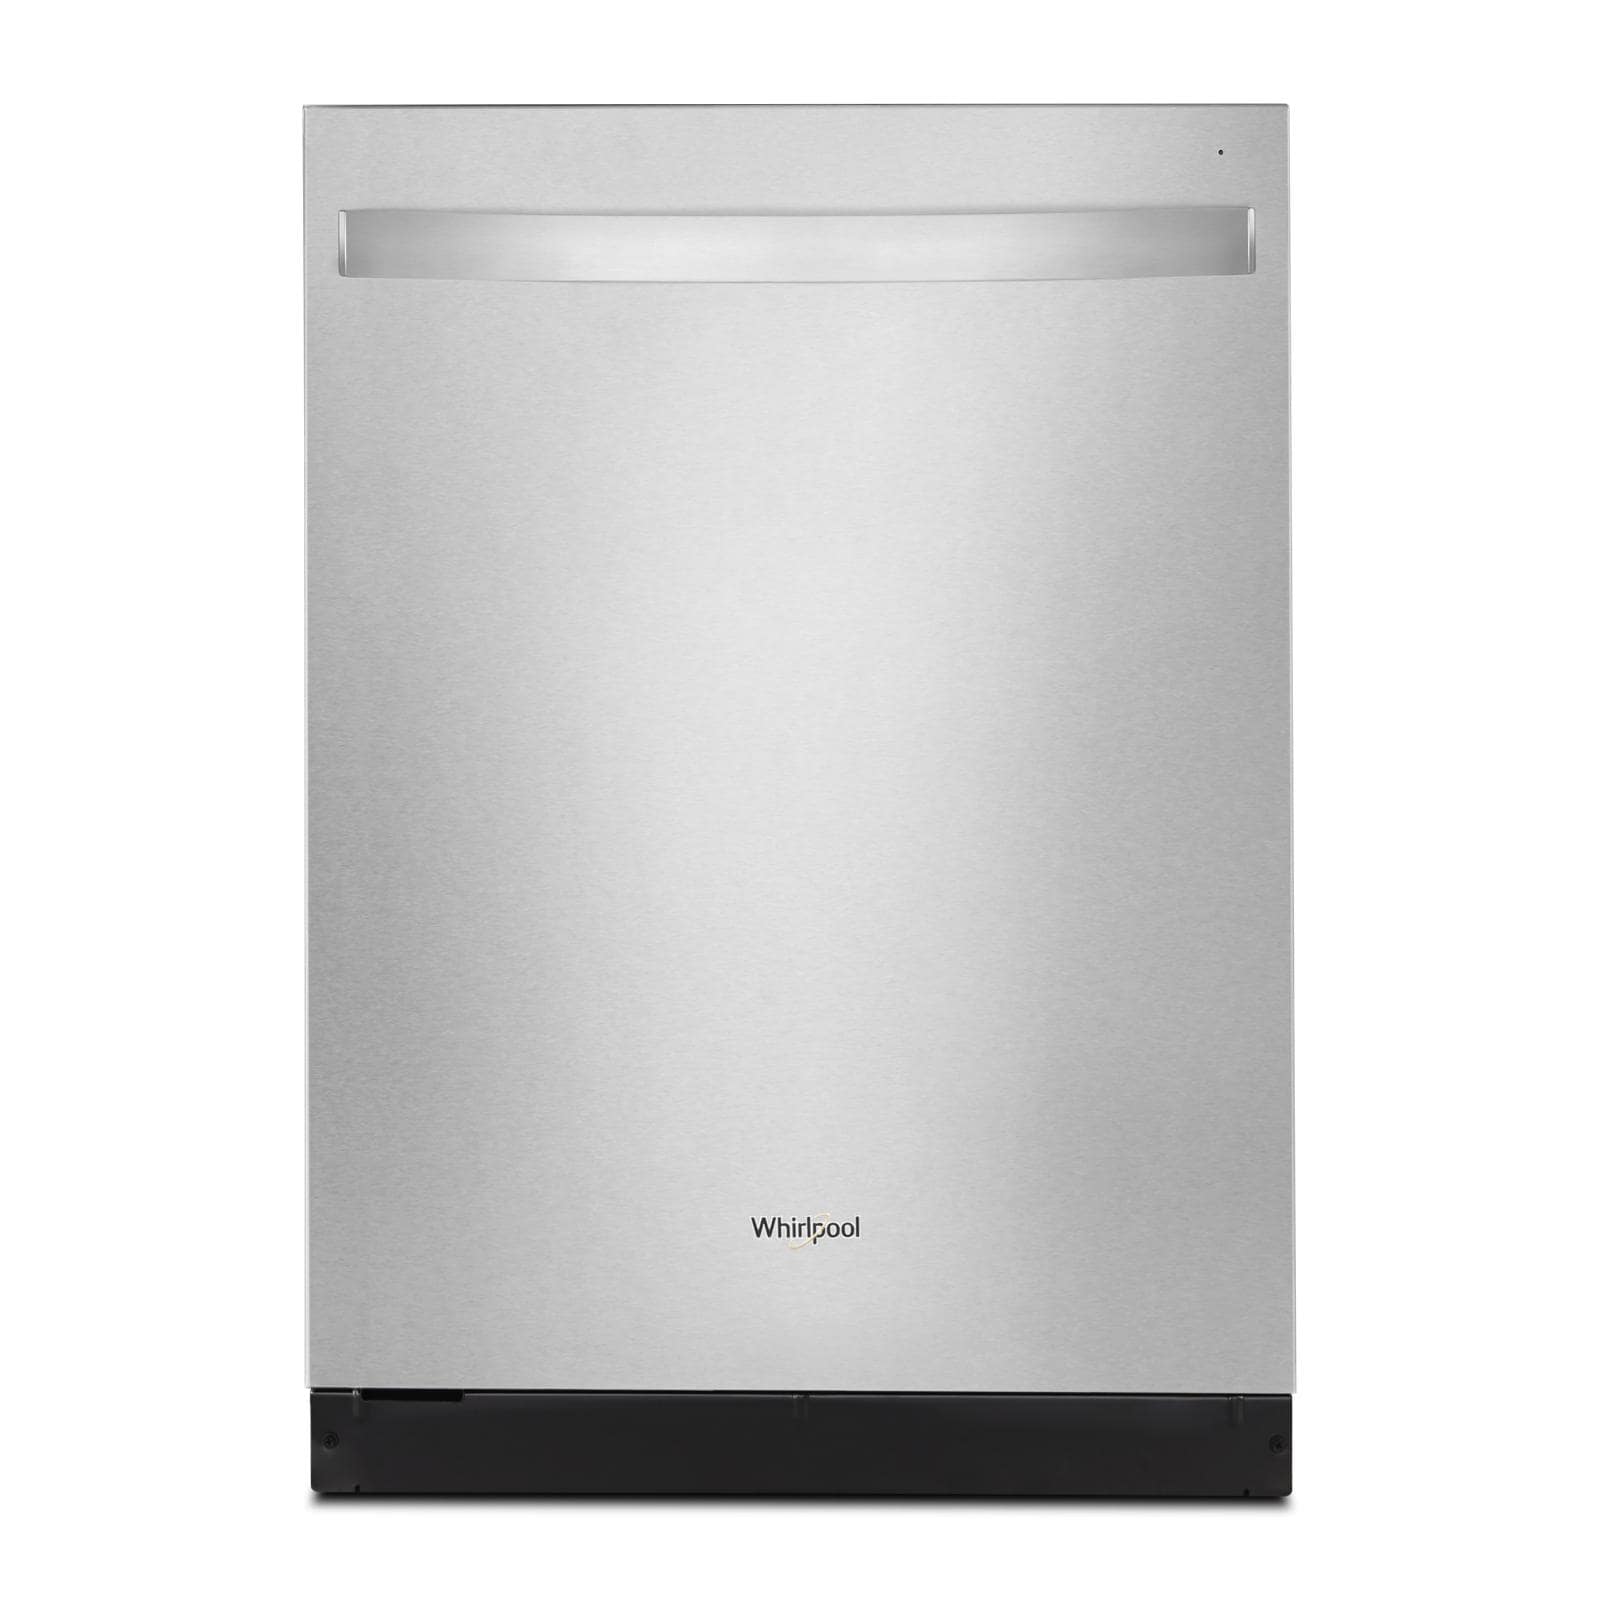 equipment - Dishwasher with side brackets for on top shelf: what